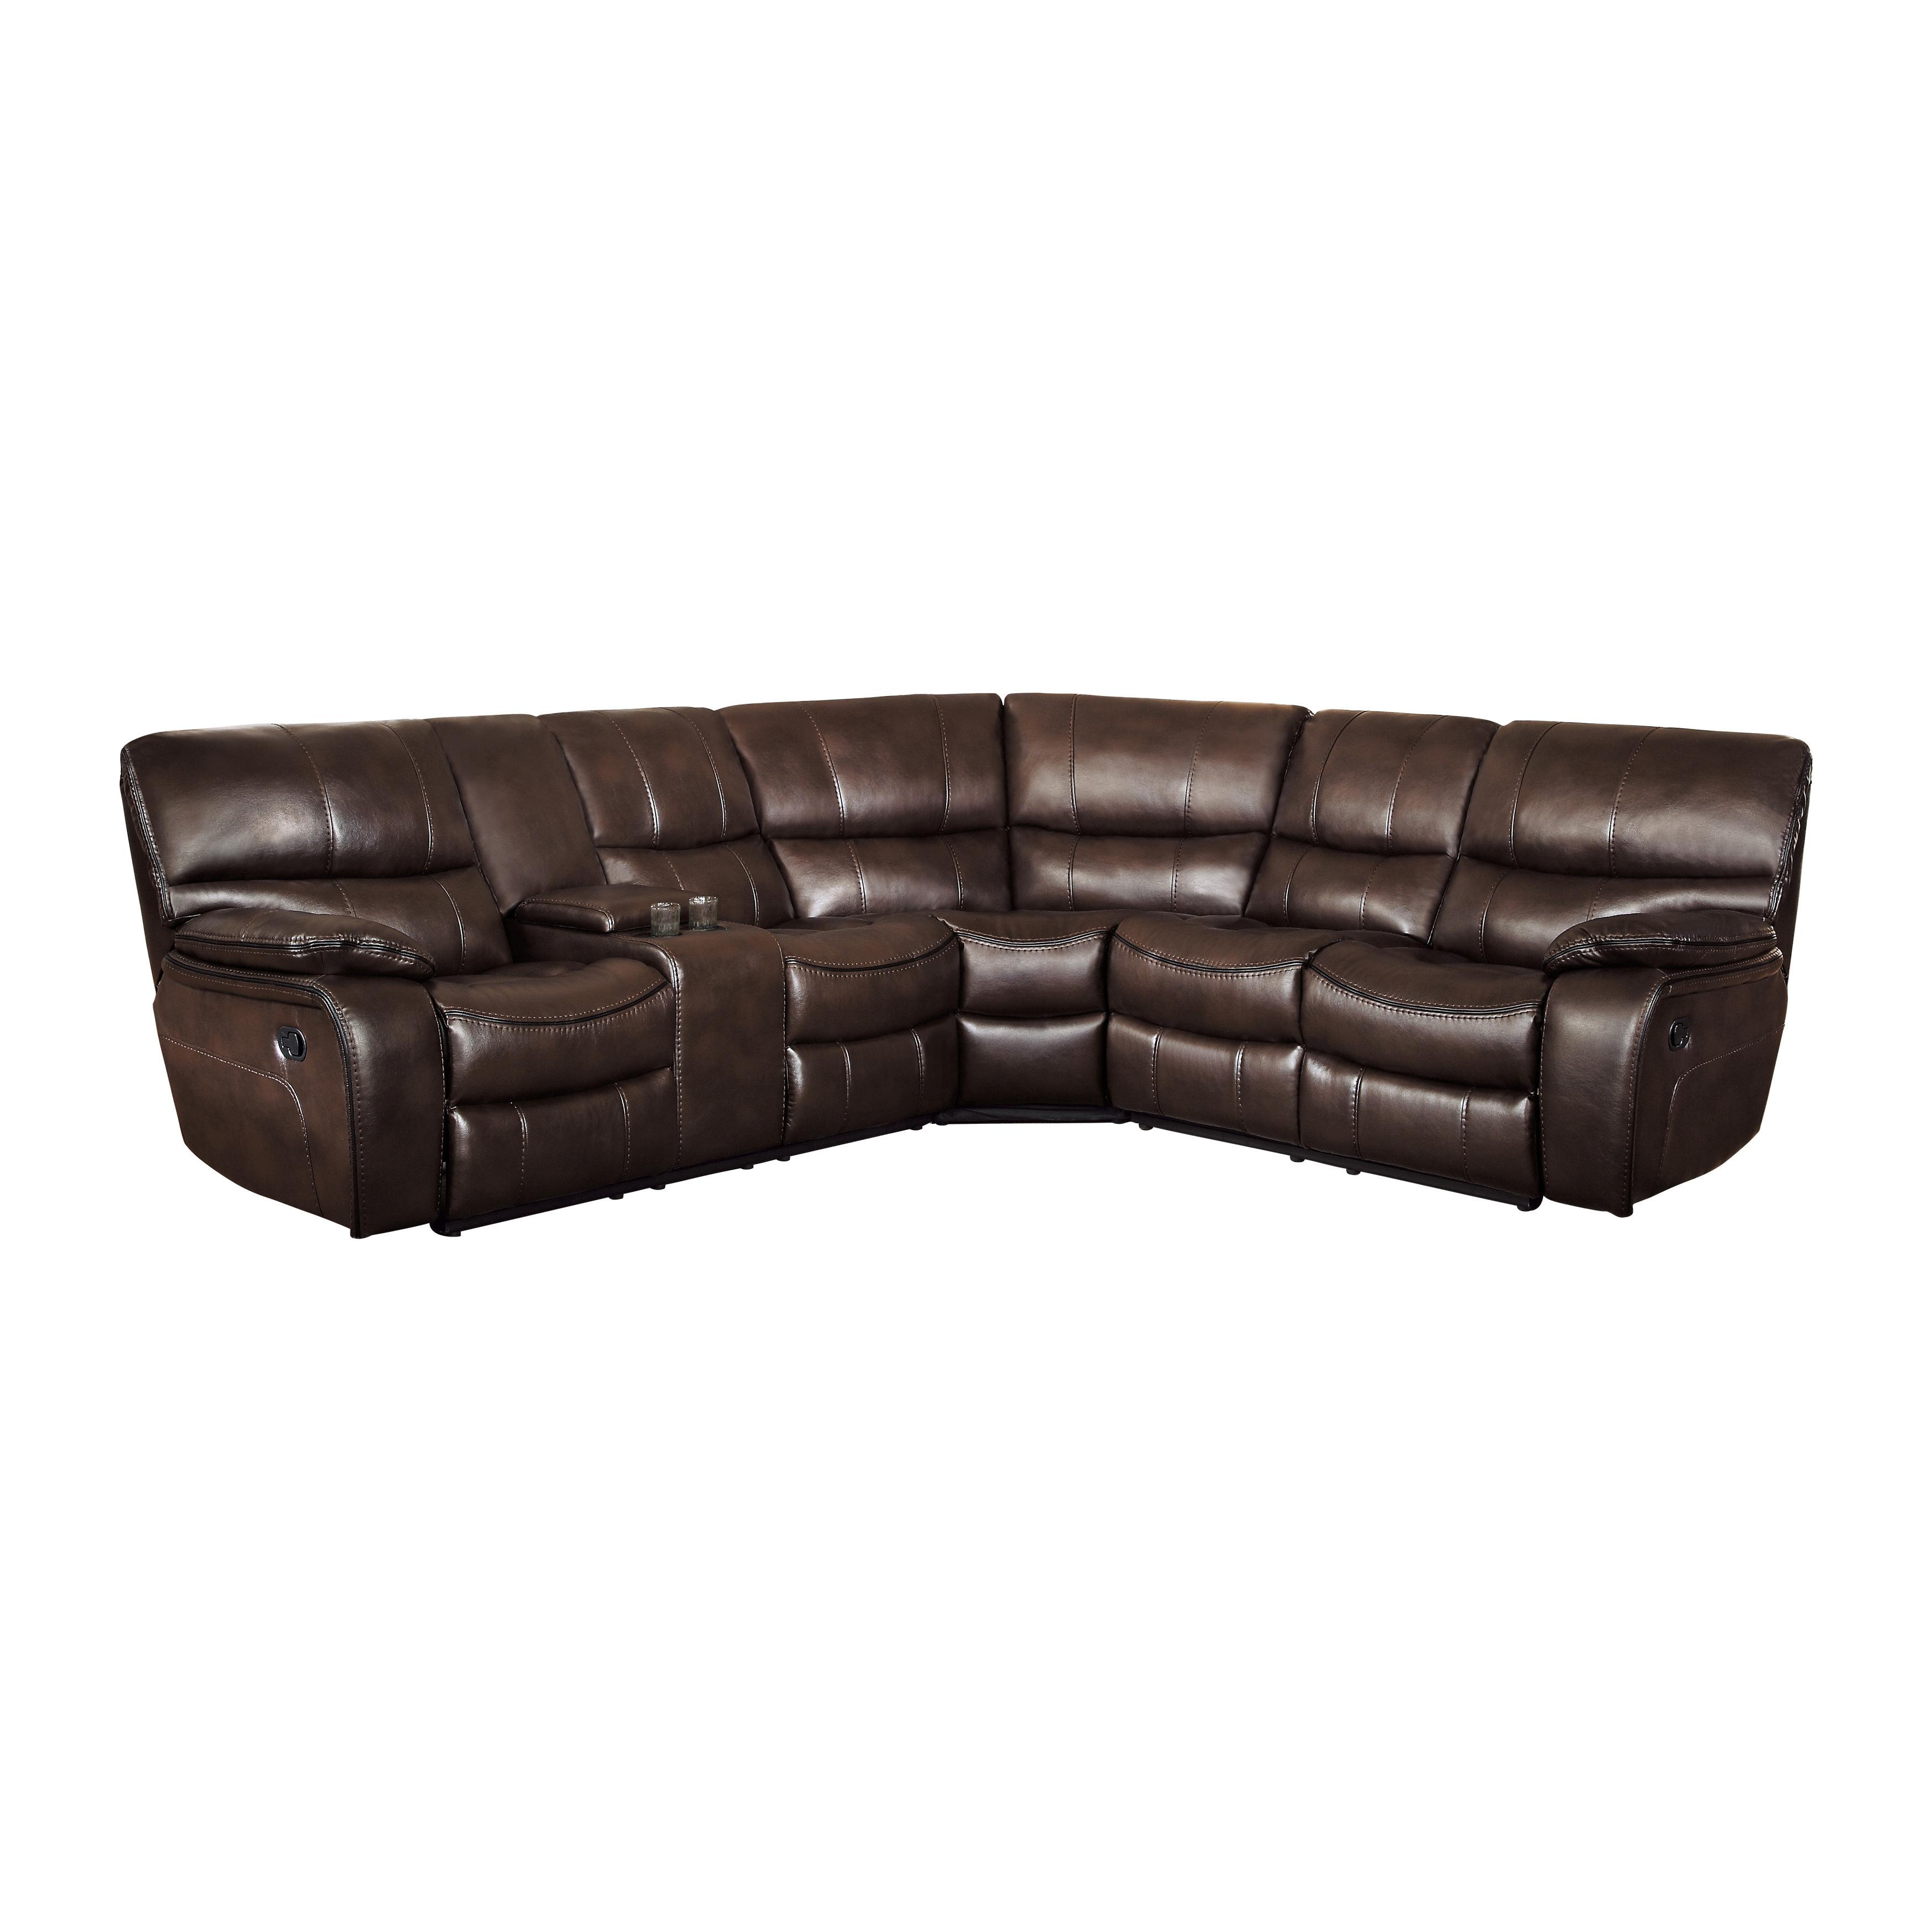 

    
Modern Dark Brown Faux Leather 3-Piece Reclining Sectional Homelegance 8480BRW*3SC Pecos
